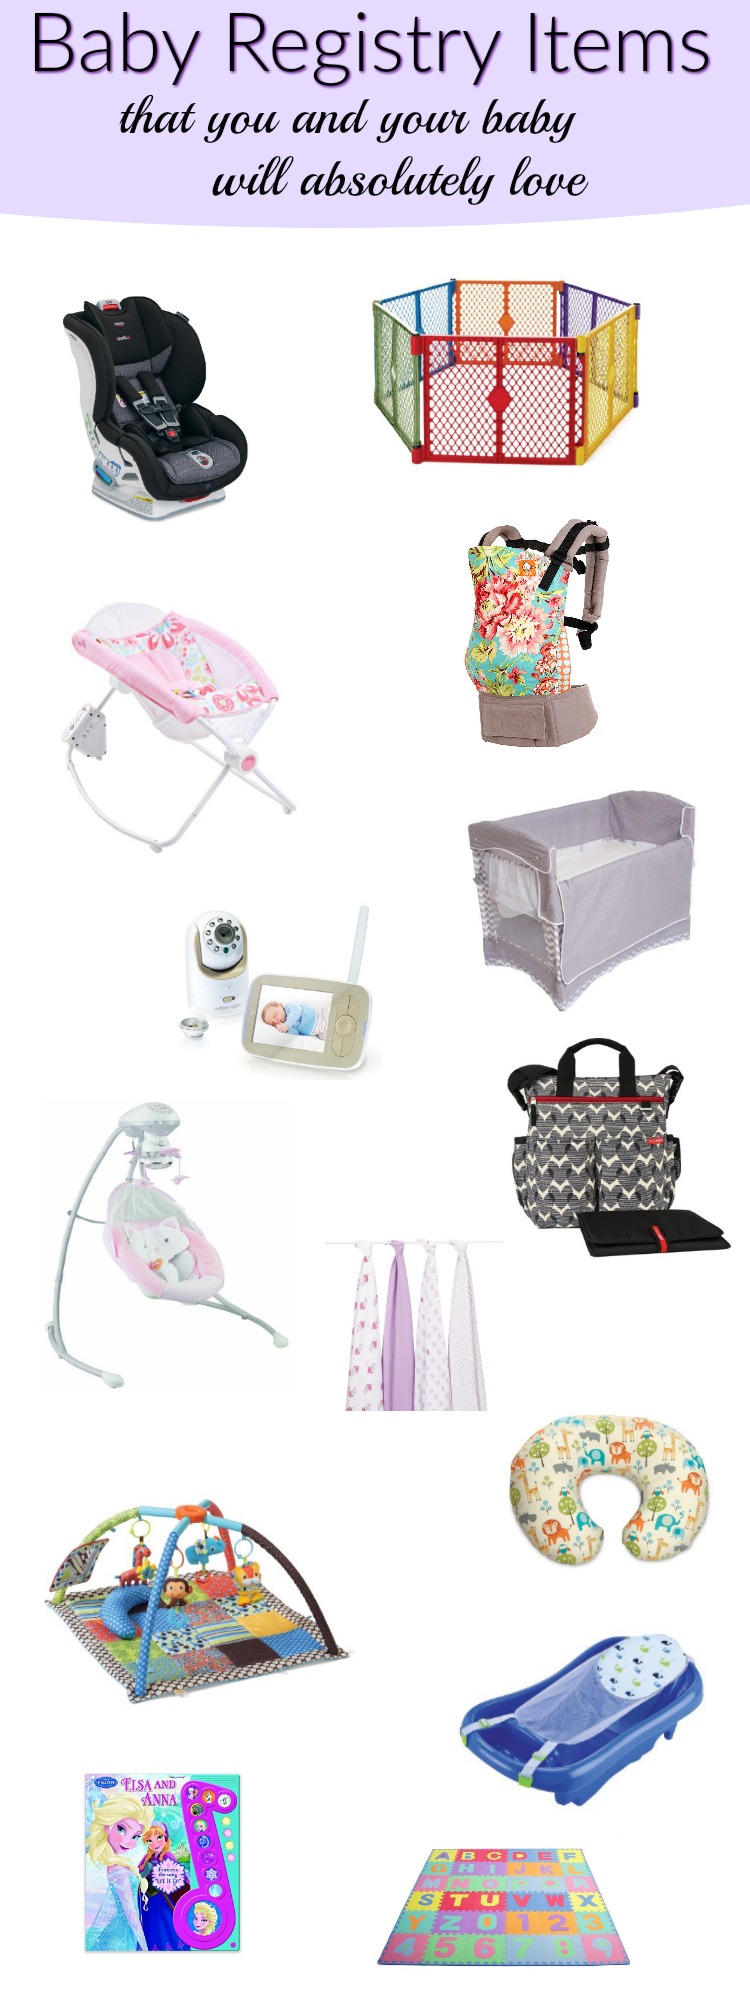 Baby Registry Items That You And Your Baby Will Absolutely Love. GREAT FIND! All of these baby products have amazing ratings. She really explains why each item is a must have. I'm putting all of these things on my Amazon baby registry!